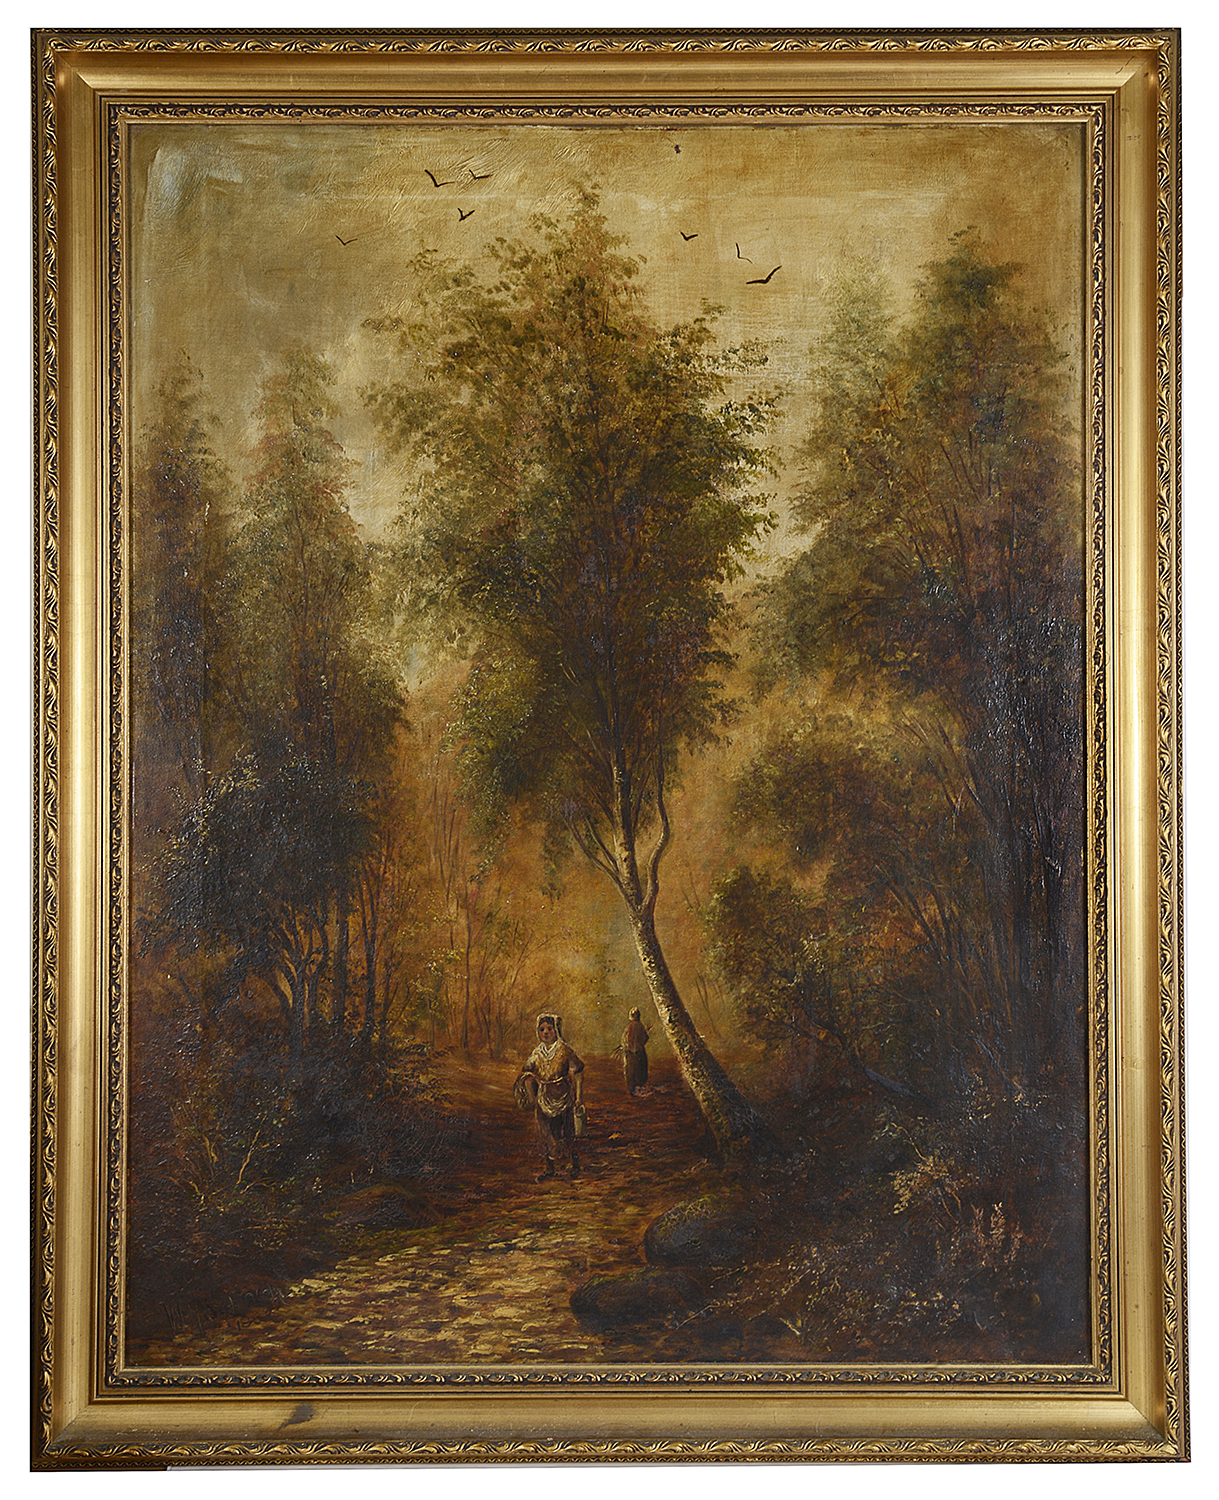 W H Sawdon (19th c. Brit.) A pair of wooded landscapes, oil on canvas